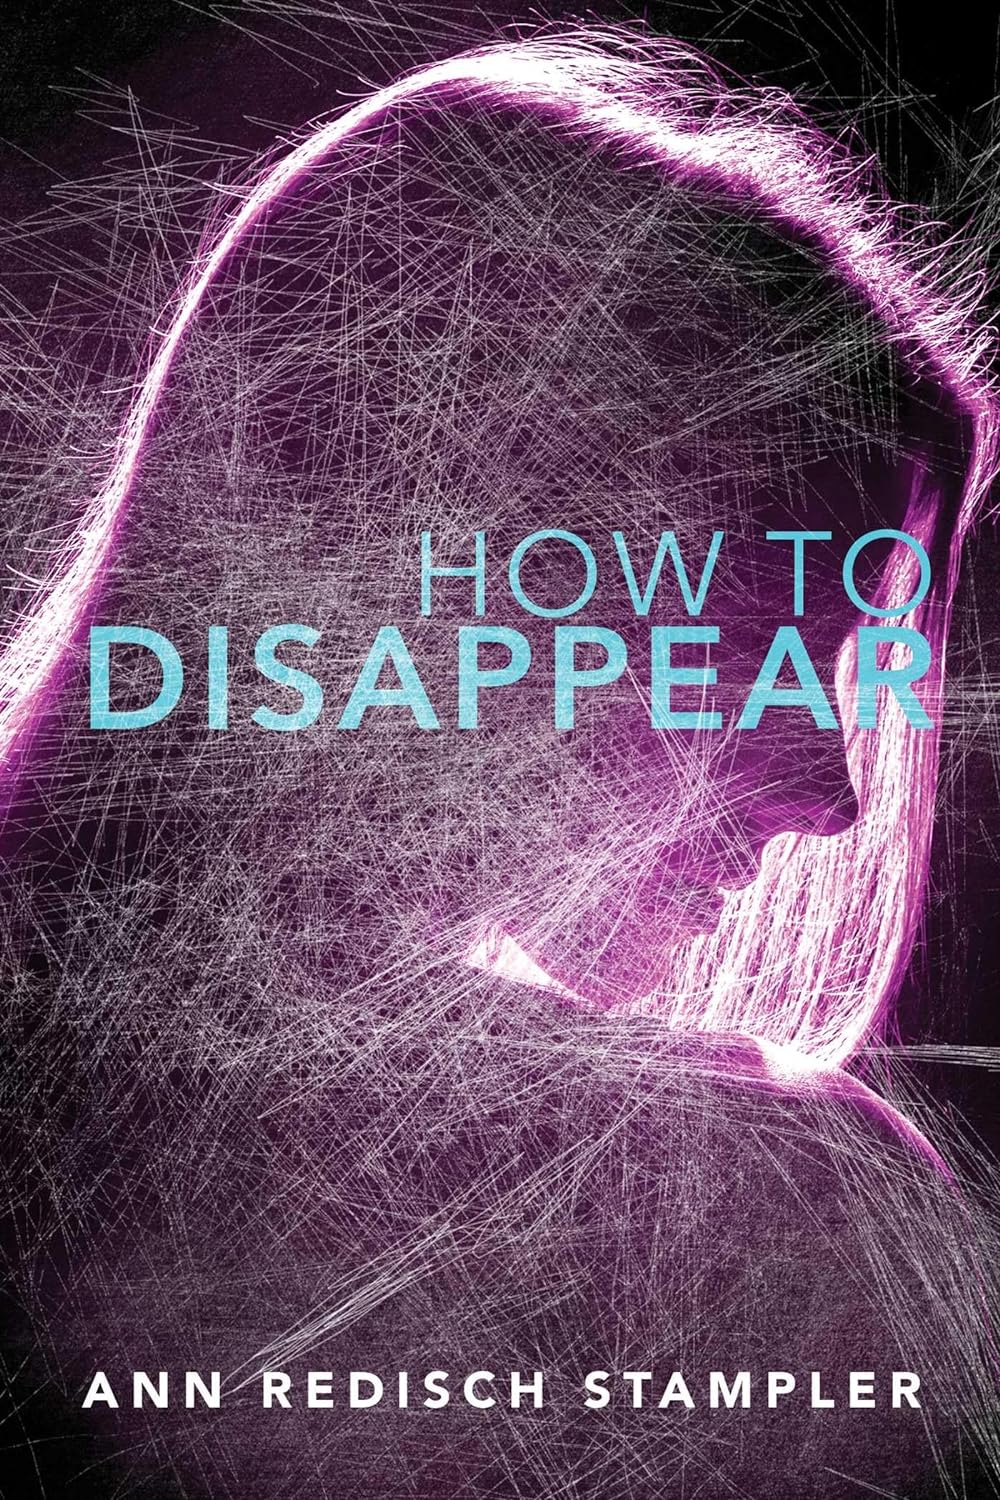 How to Disappear - Ann Redisch Stampler